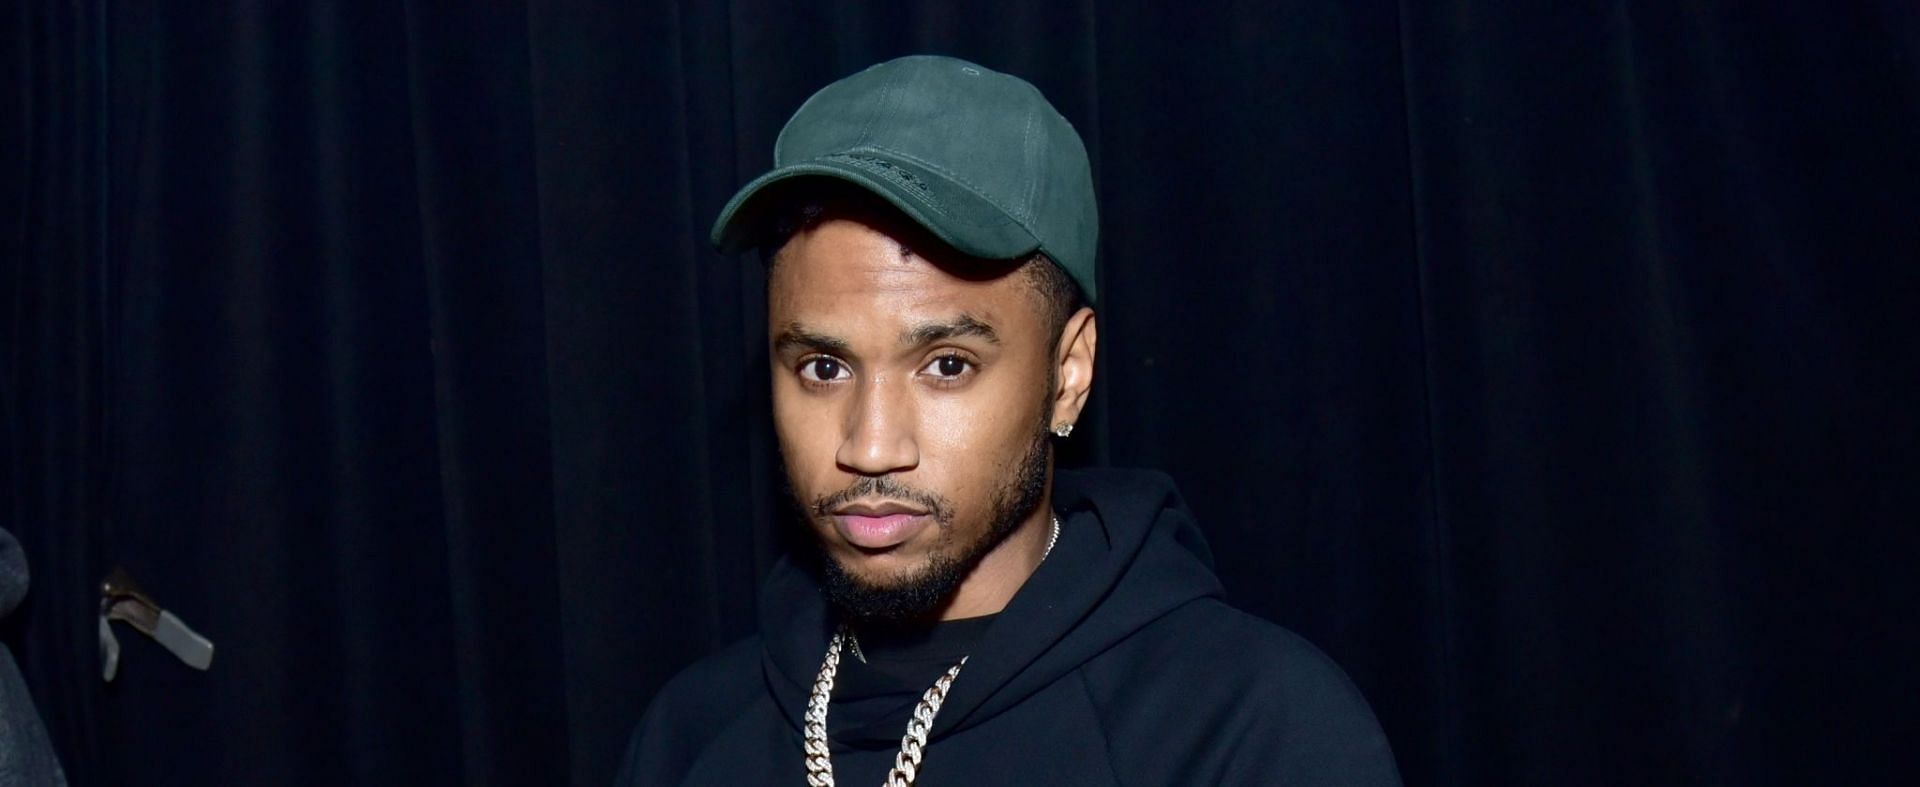 Trey Songz has faced several legal issues since 2012 (Image via Sean Zanni/Getty Images)